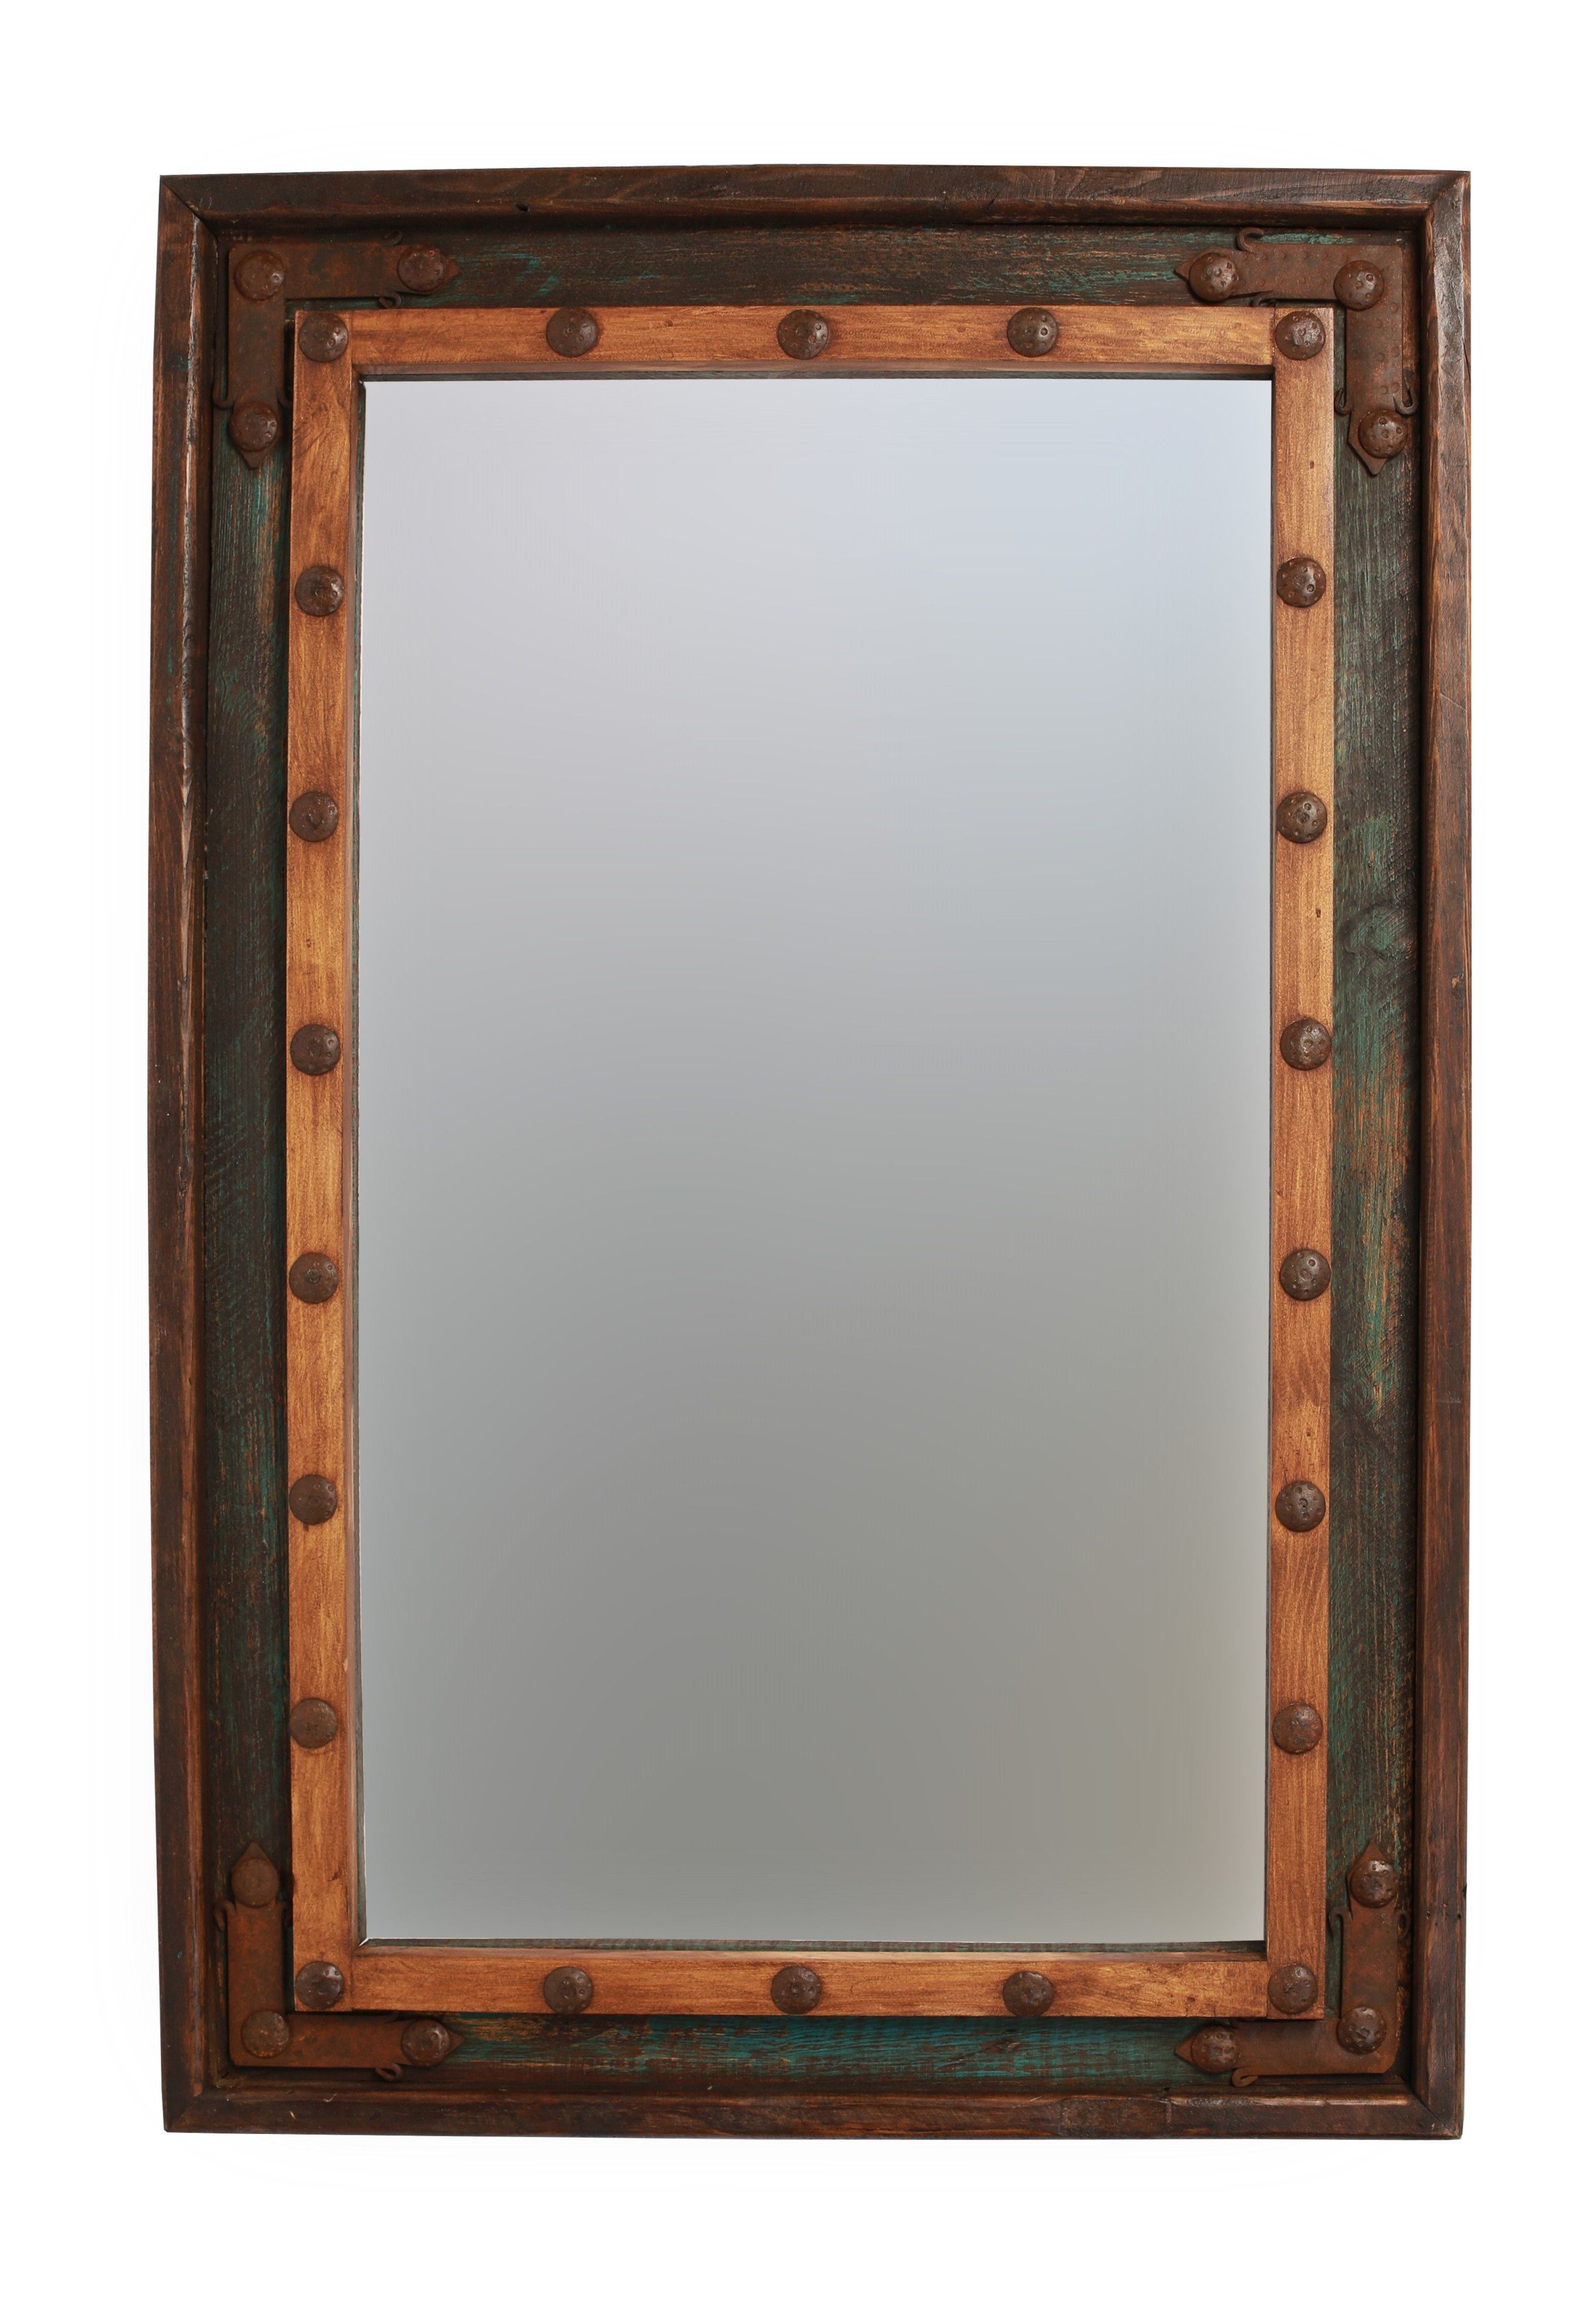 2020 Cromartie Tree Branch Wall Mirrors Pertaining To Farmhouse & Rustic Loon Peak Wall & Accent Mirrors (View 15 of 20)